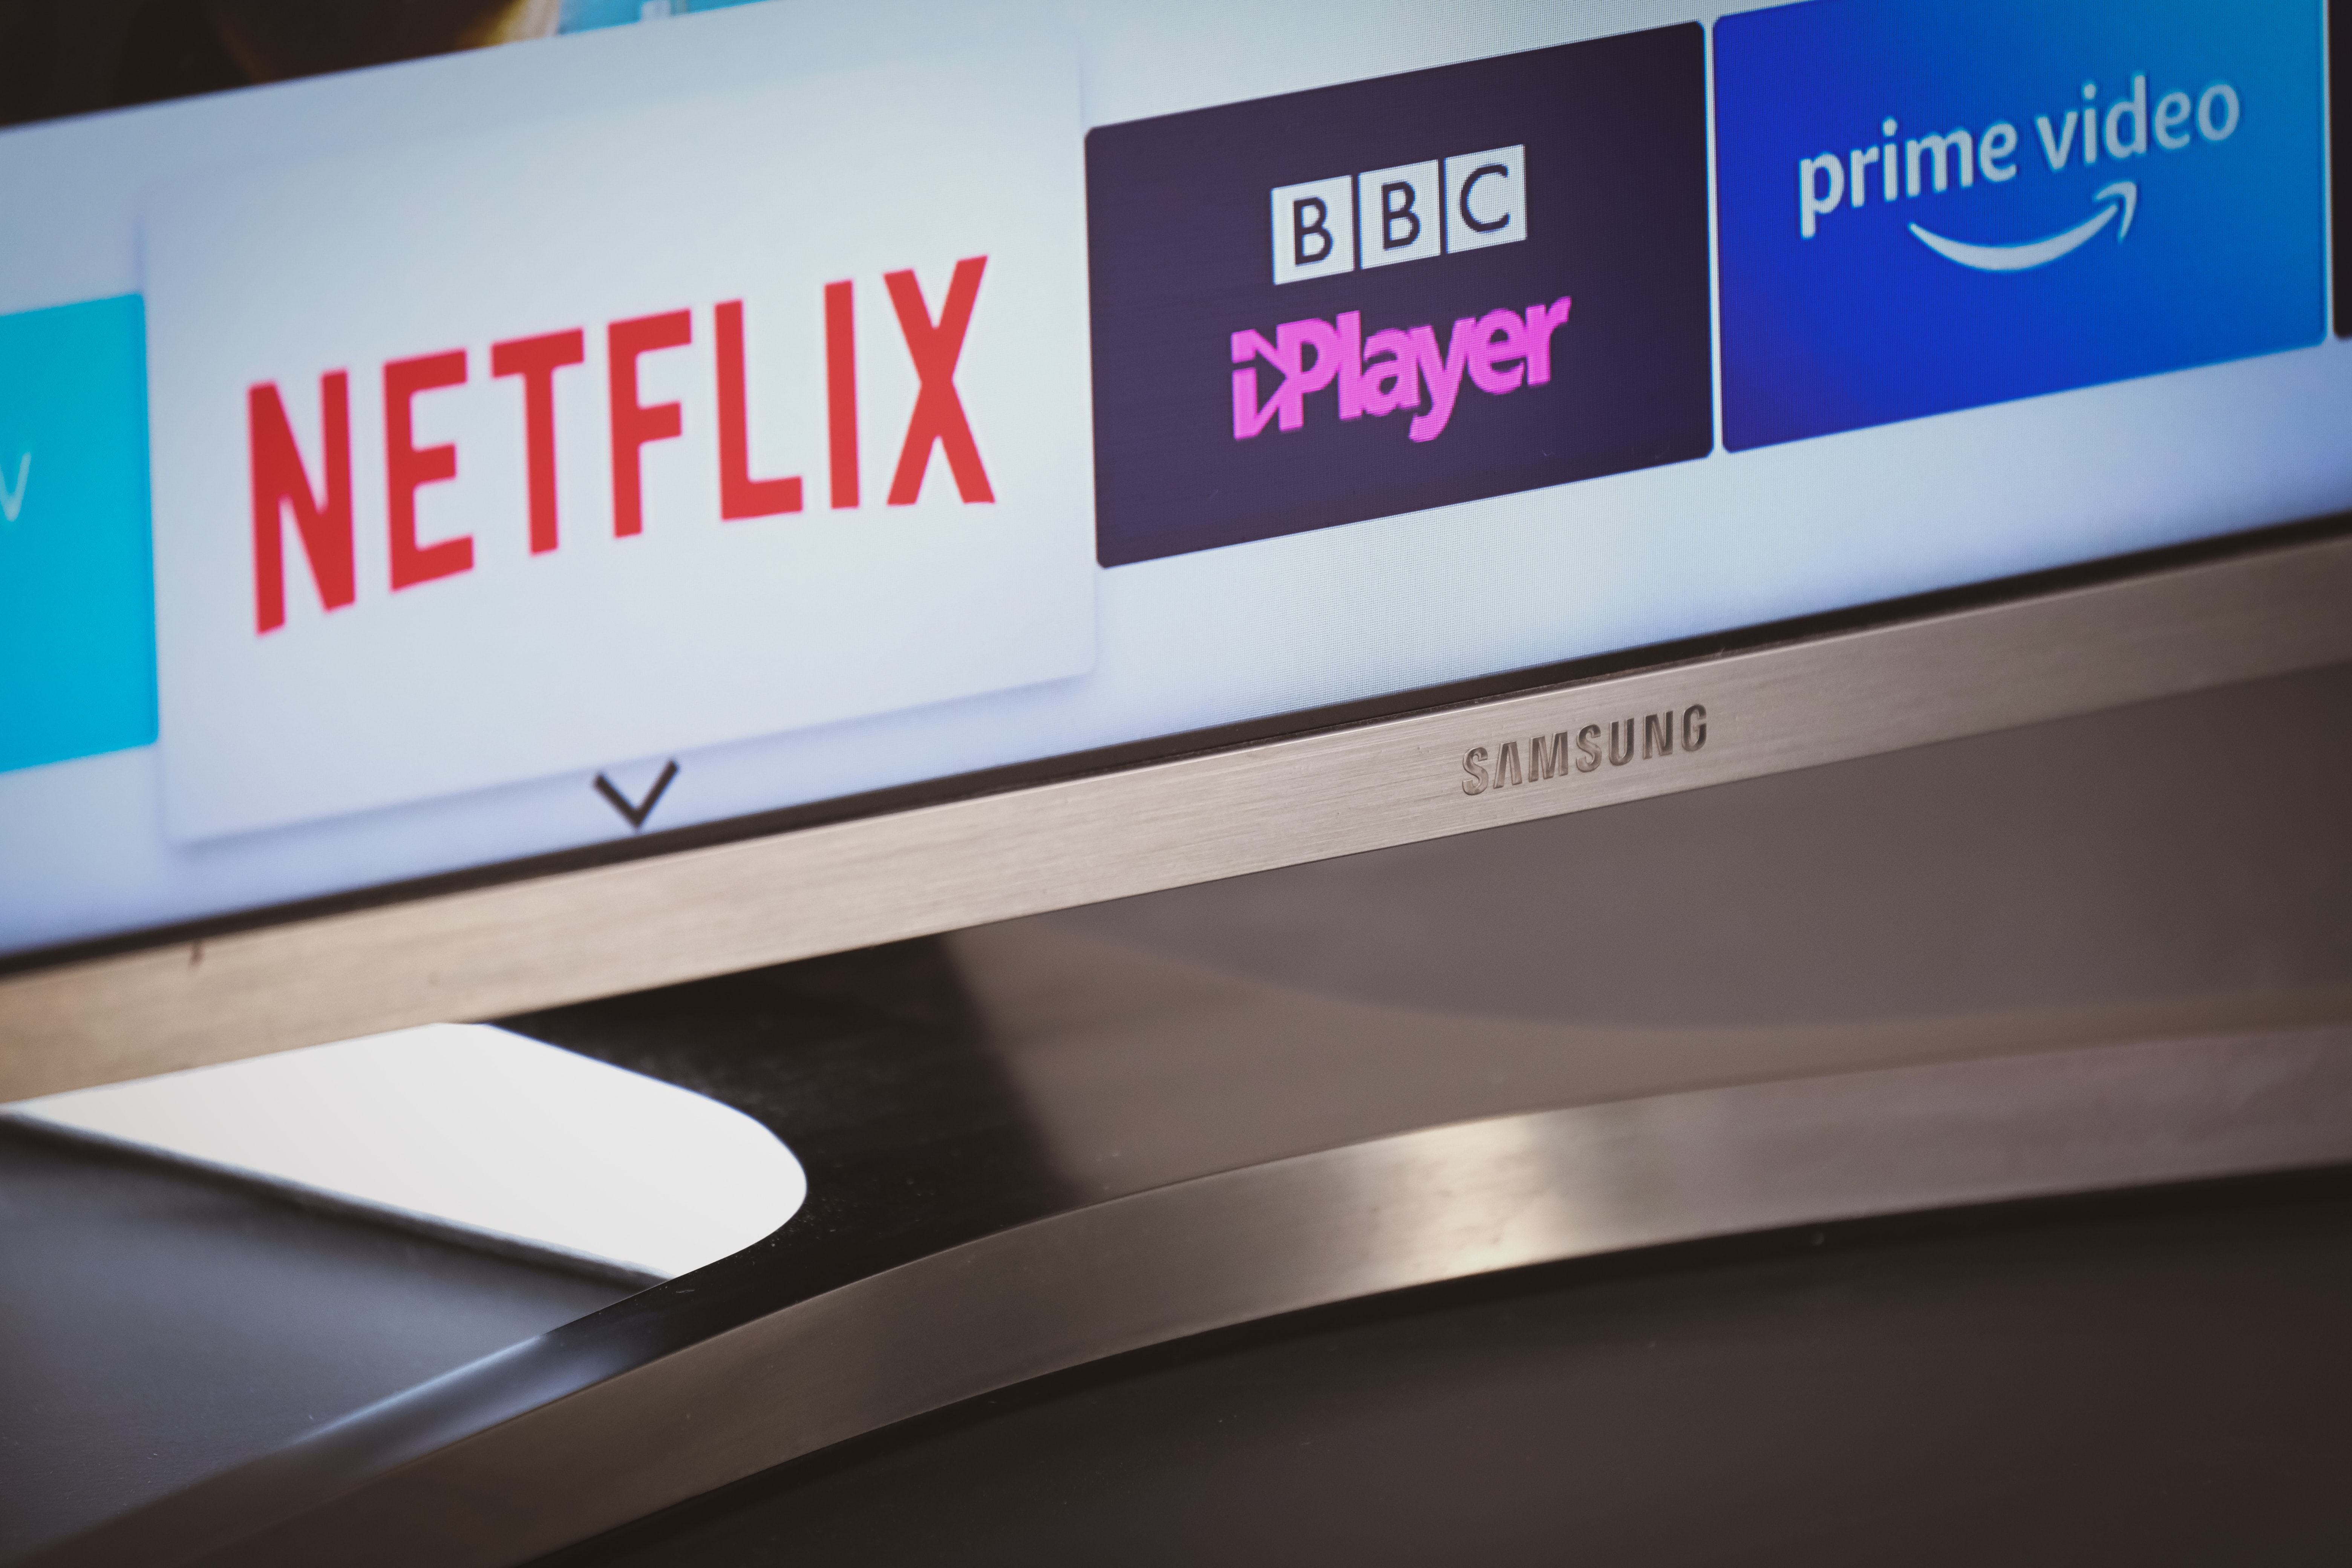 Image shows the bottom of a computer screen with the logos for Netflix, BBC iPlayer and Prime Video